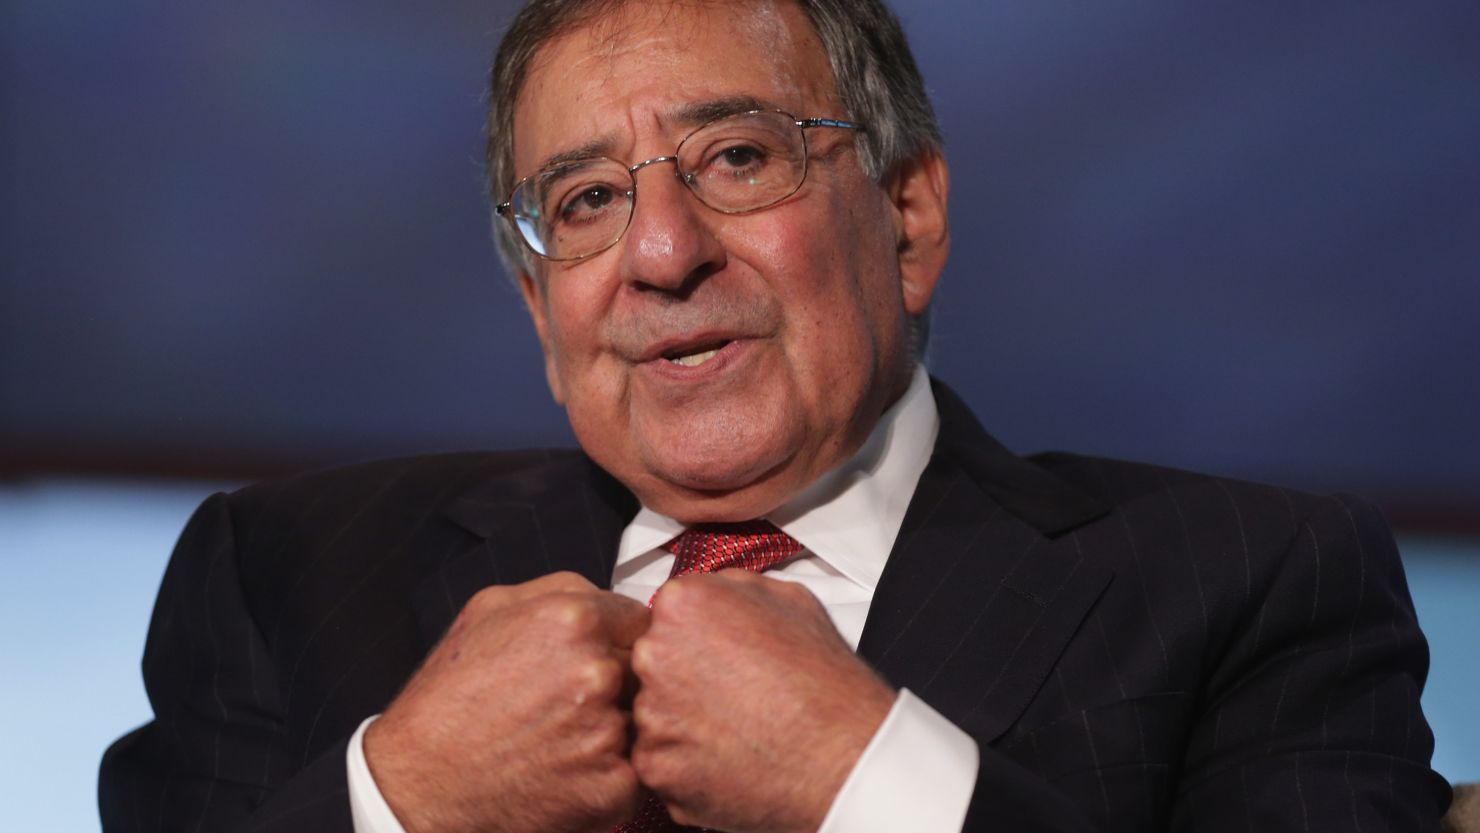 Former Secretary of Defense and director of the Central Intelligence Agency Leon Panetta discuss his new book, 'Worthy Fights,' during an event in the Jack Morton Auditorium at George Washington University October 14, 2014 in Washington, D.C.